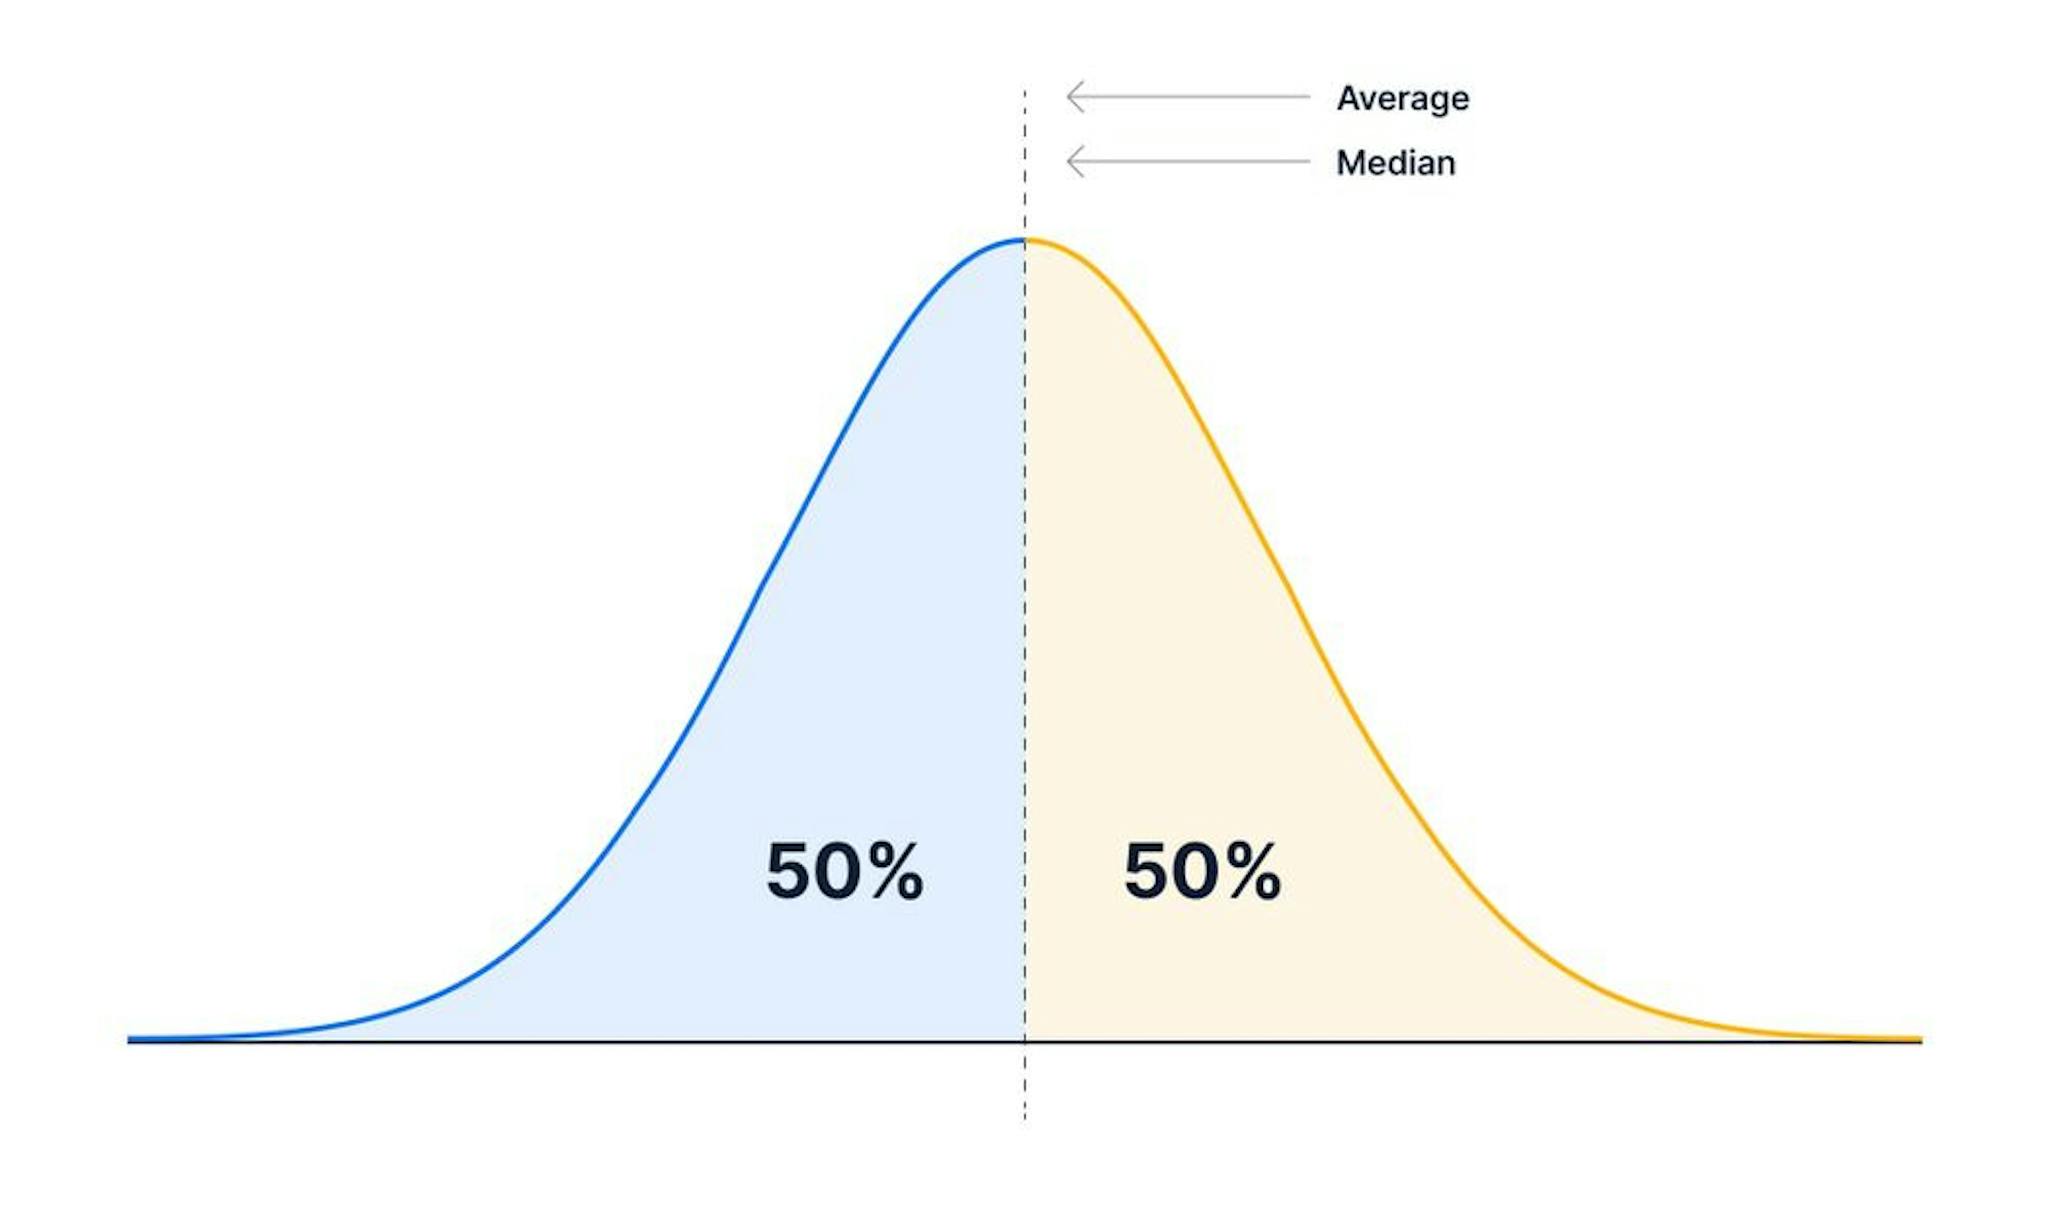 The average and median are the same in a normal distribution, and they split the graph exactly in half. But they aren’t calculated the same way, don’t represent the same thing, and aren’t necessarily the same in other distributions. 